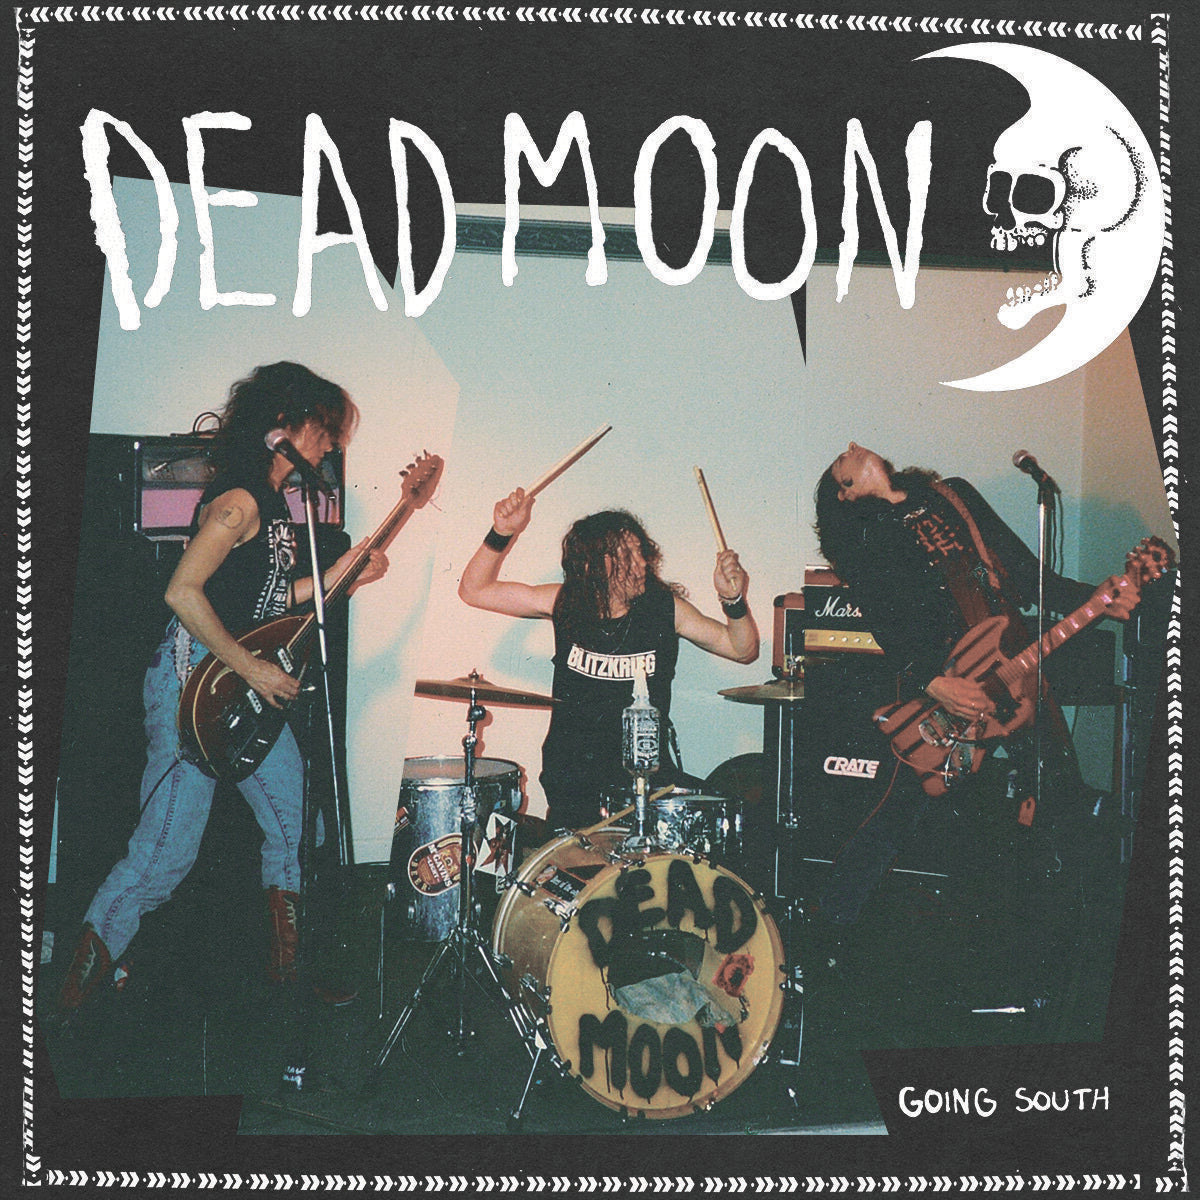 Dead Moon - Going South (Live in New Zealand 1992) [2xLP] - New LP